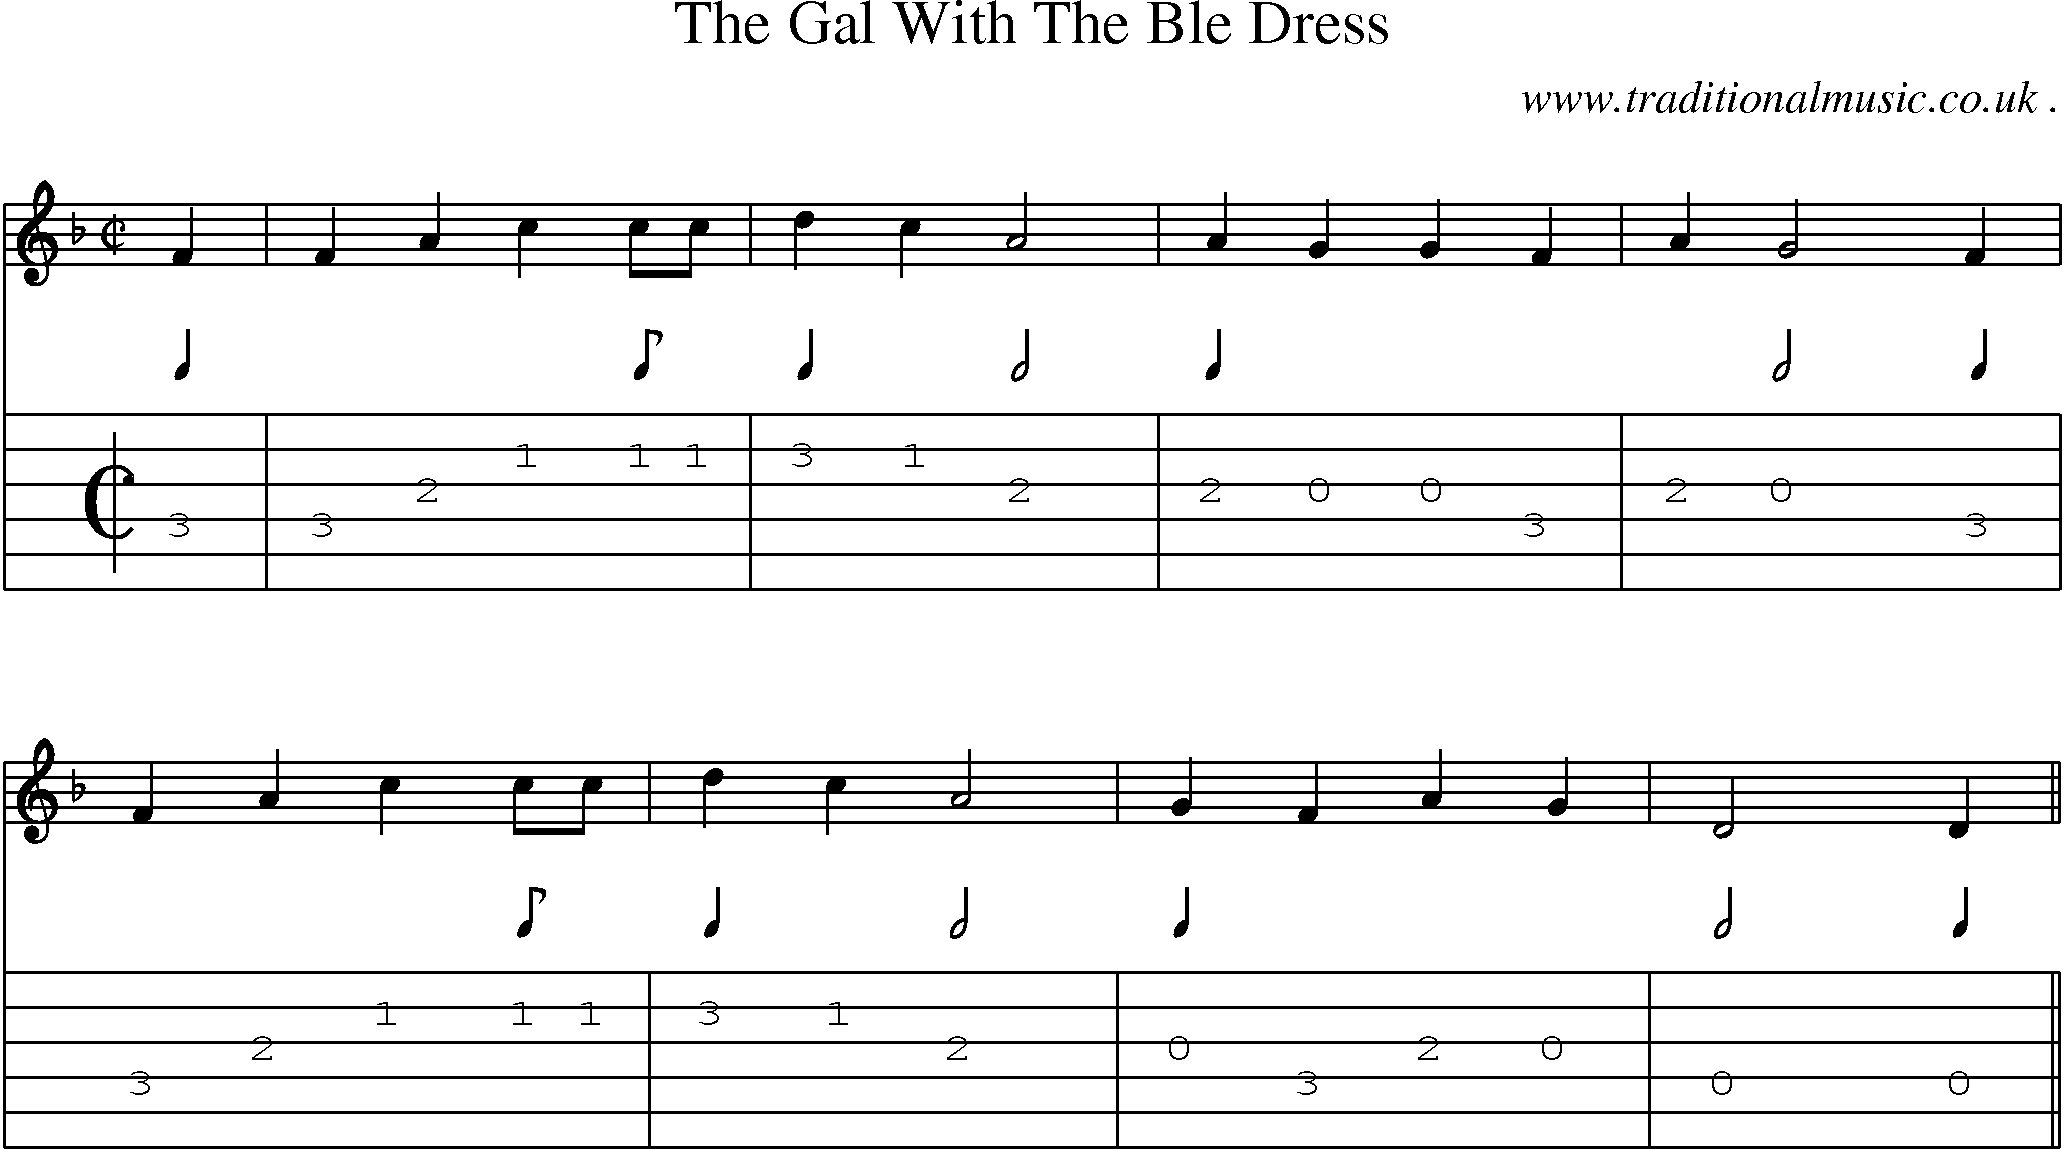 Sheet-Music and Guitar Tabs for The Gal With The Ble Dress